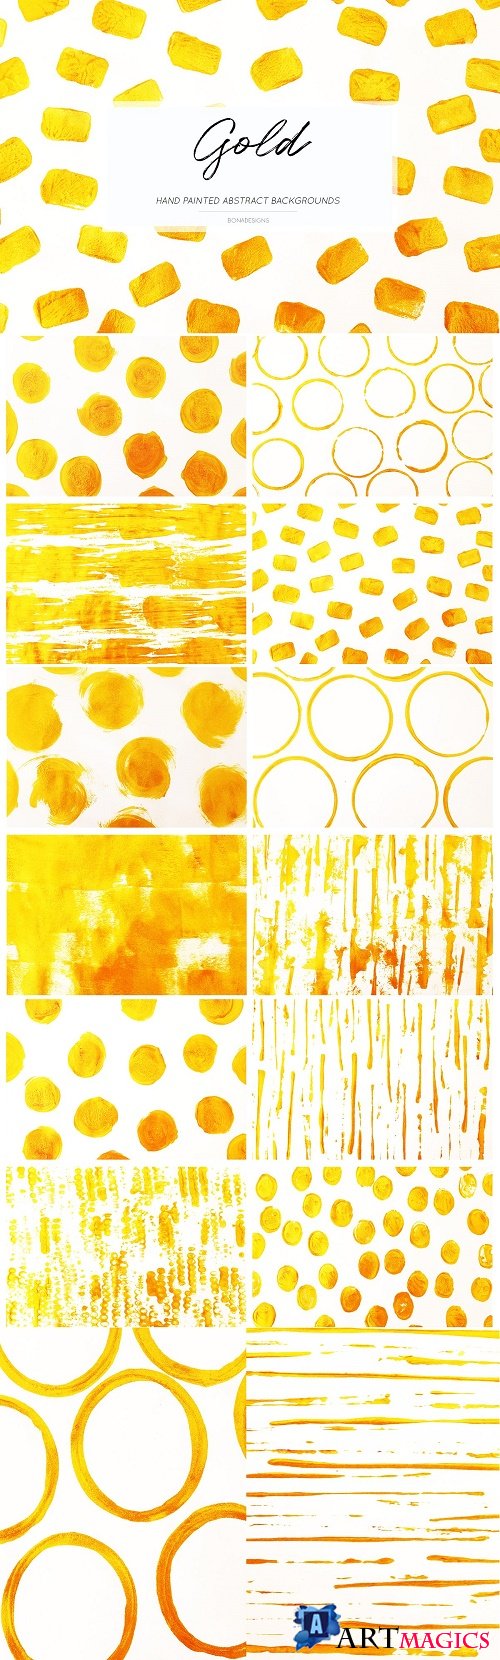 Gold Abstract Backgrounds - 3971573